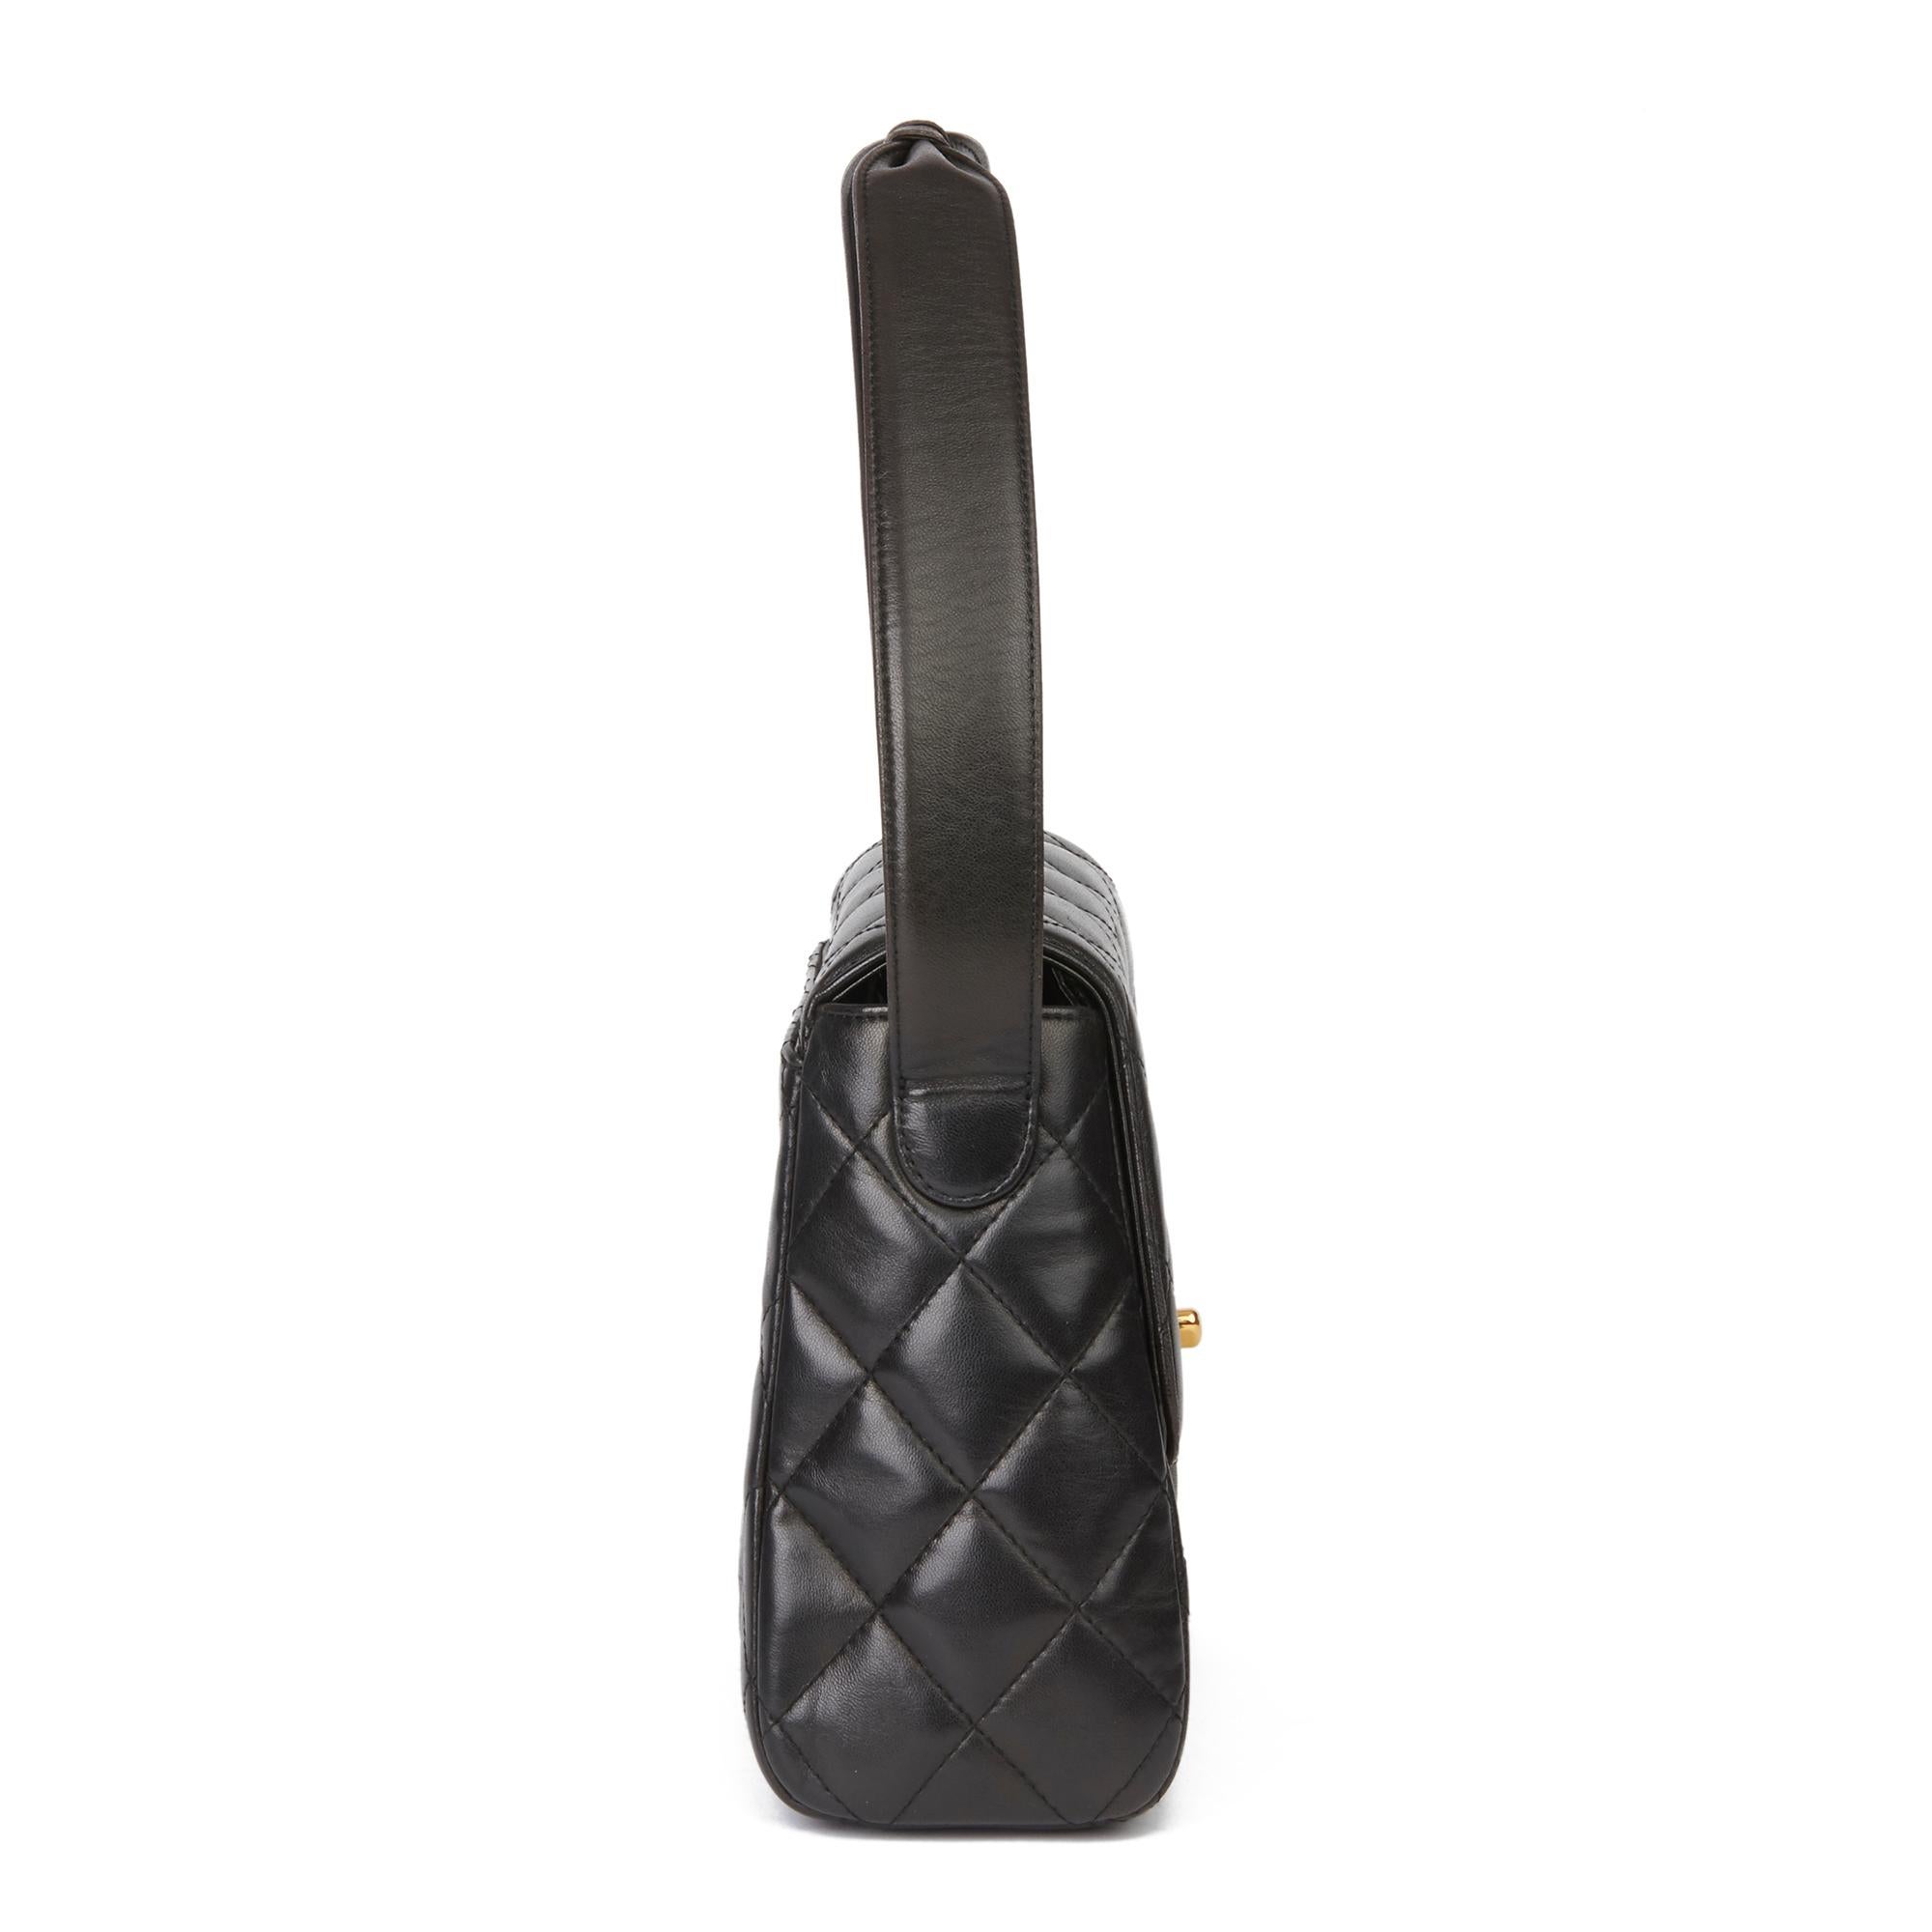 CHANEL
Black Quilted Lambskin Vintage Classic Shoulder Bag 

Xupes Reference: HB3201
Serial Number: 4769402
Age (Circa): 1997
Accompanied By: Authenticity Card
Authenticity Details: Serial Sticker, Authenticity Card (Made in France)
Gender: